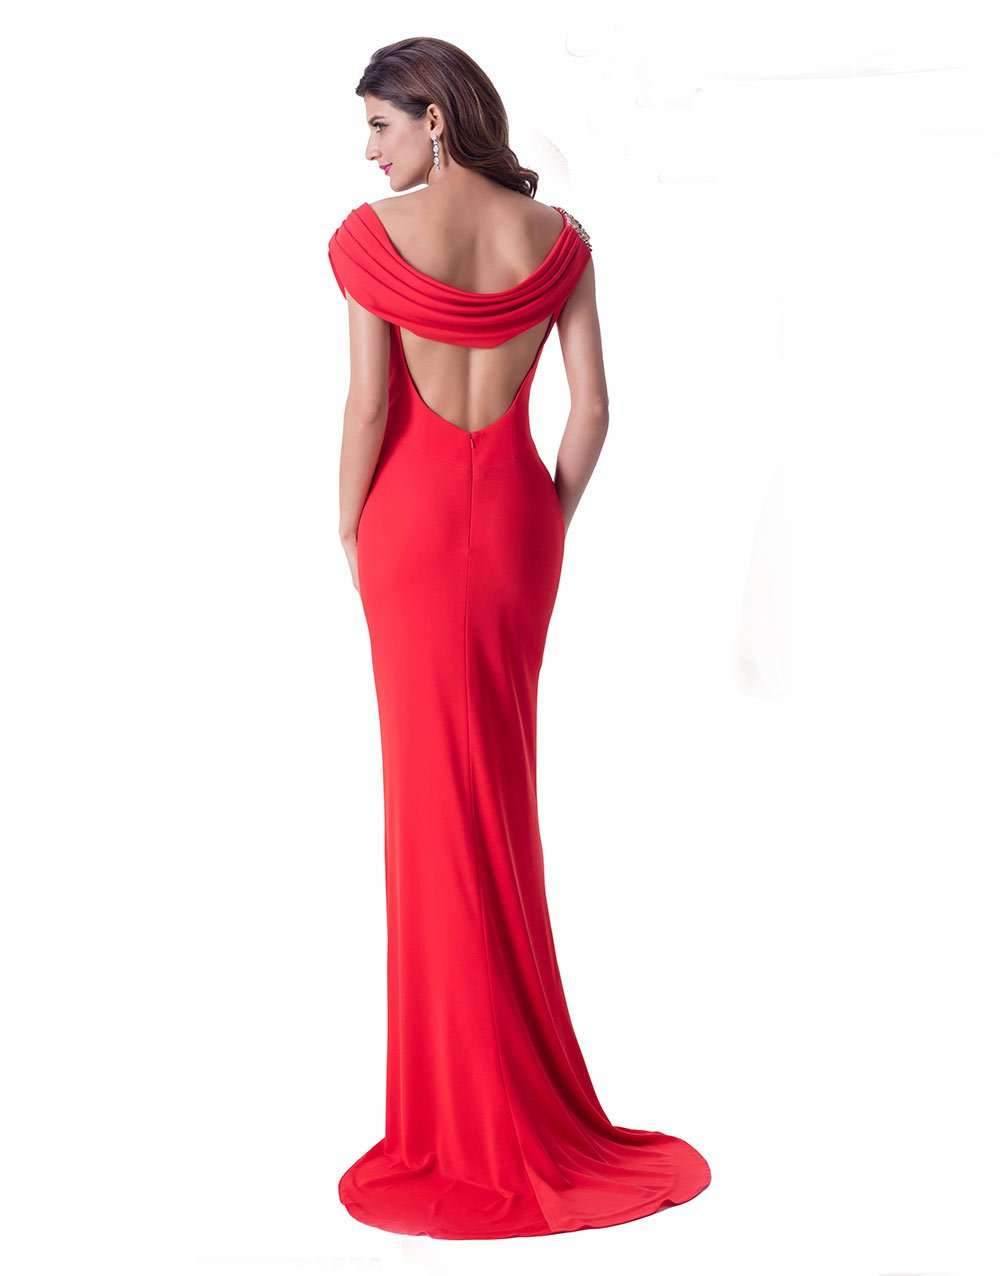 UK10 RED - BIANCA - SALE - Adore Bridal and Occasion Wear